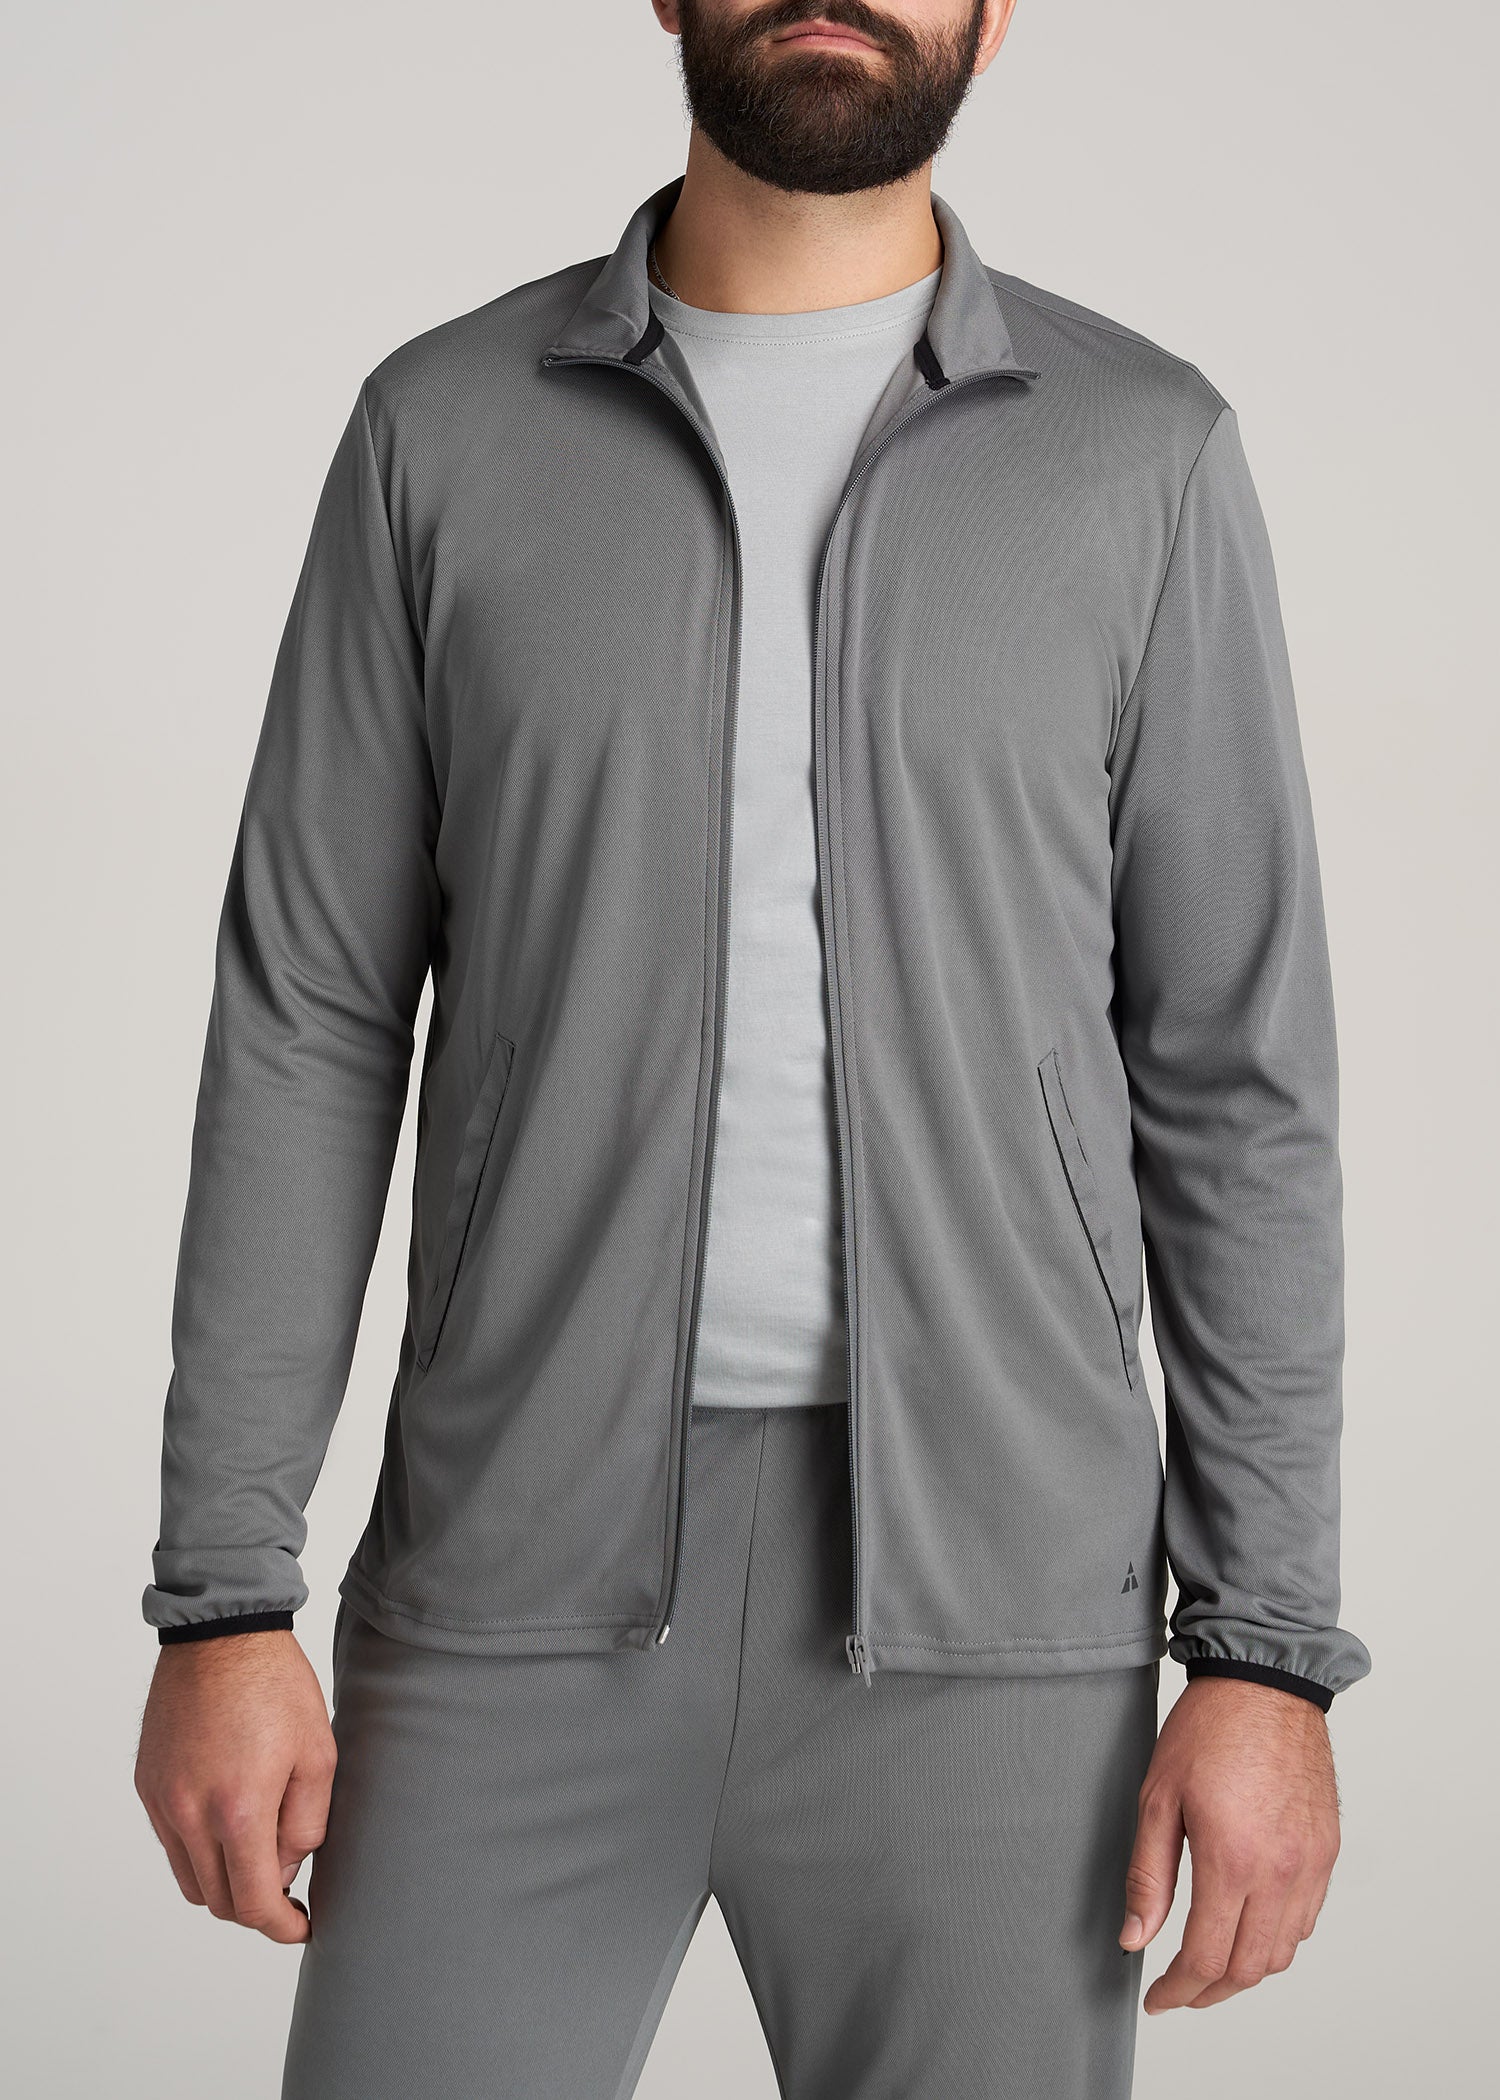 A.T. Performance Light Weight Jacket in Charcoal - Tall Men's Jacket